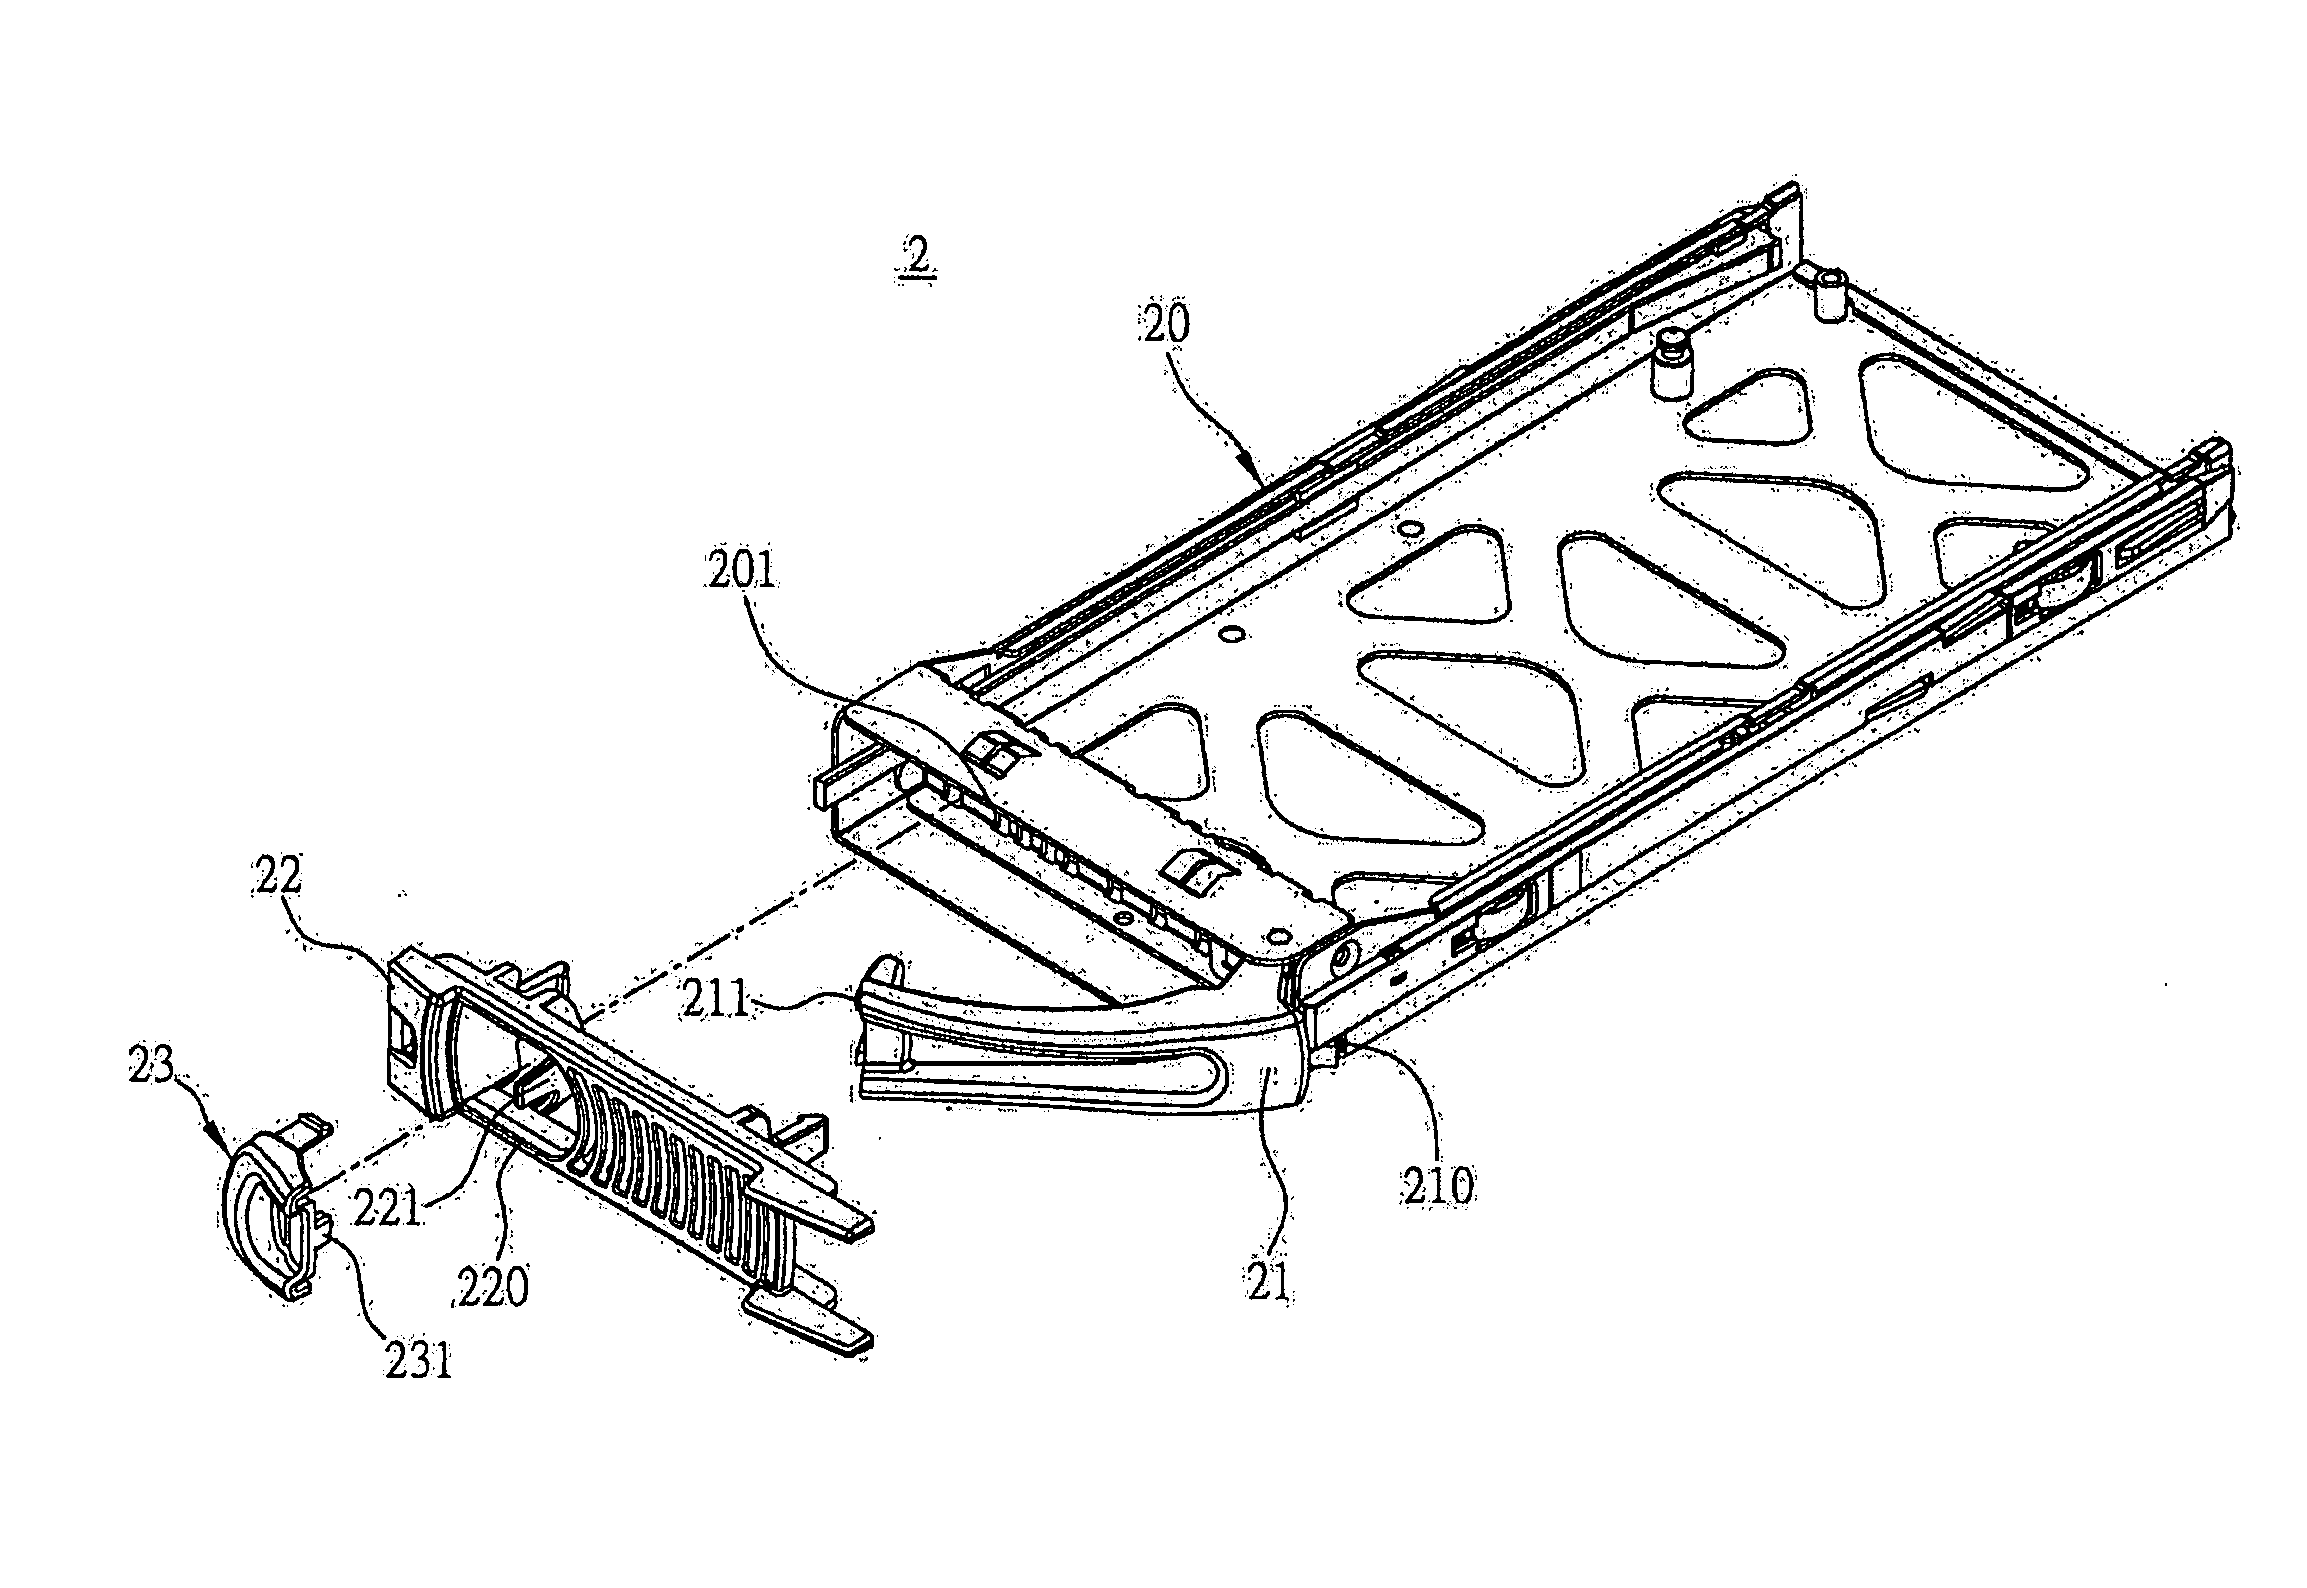 Removable device